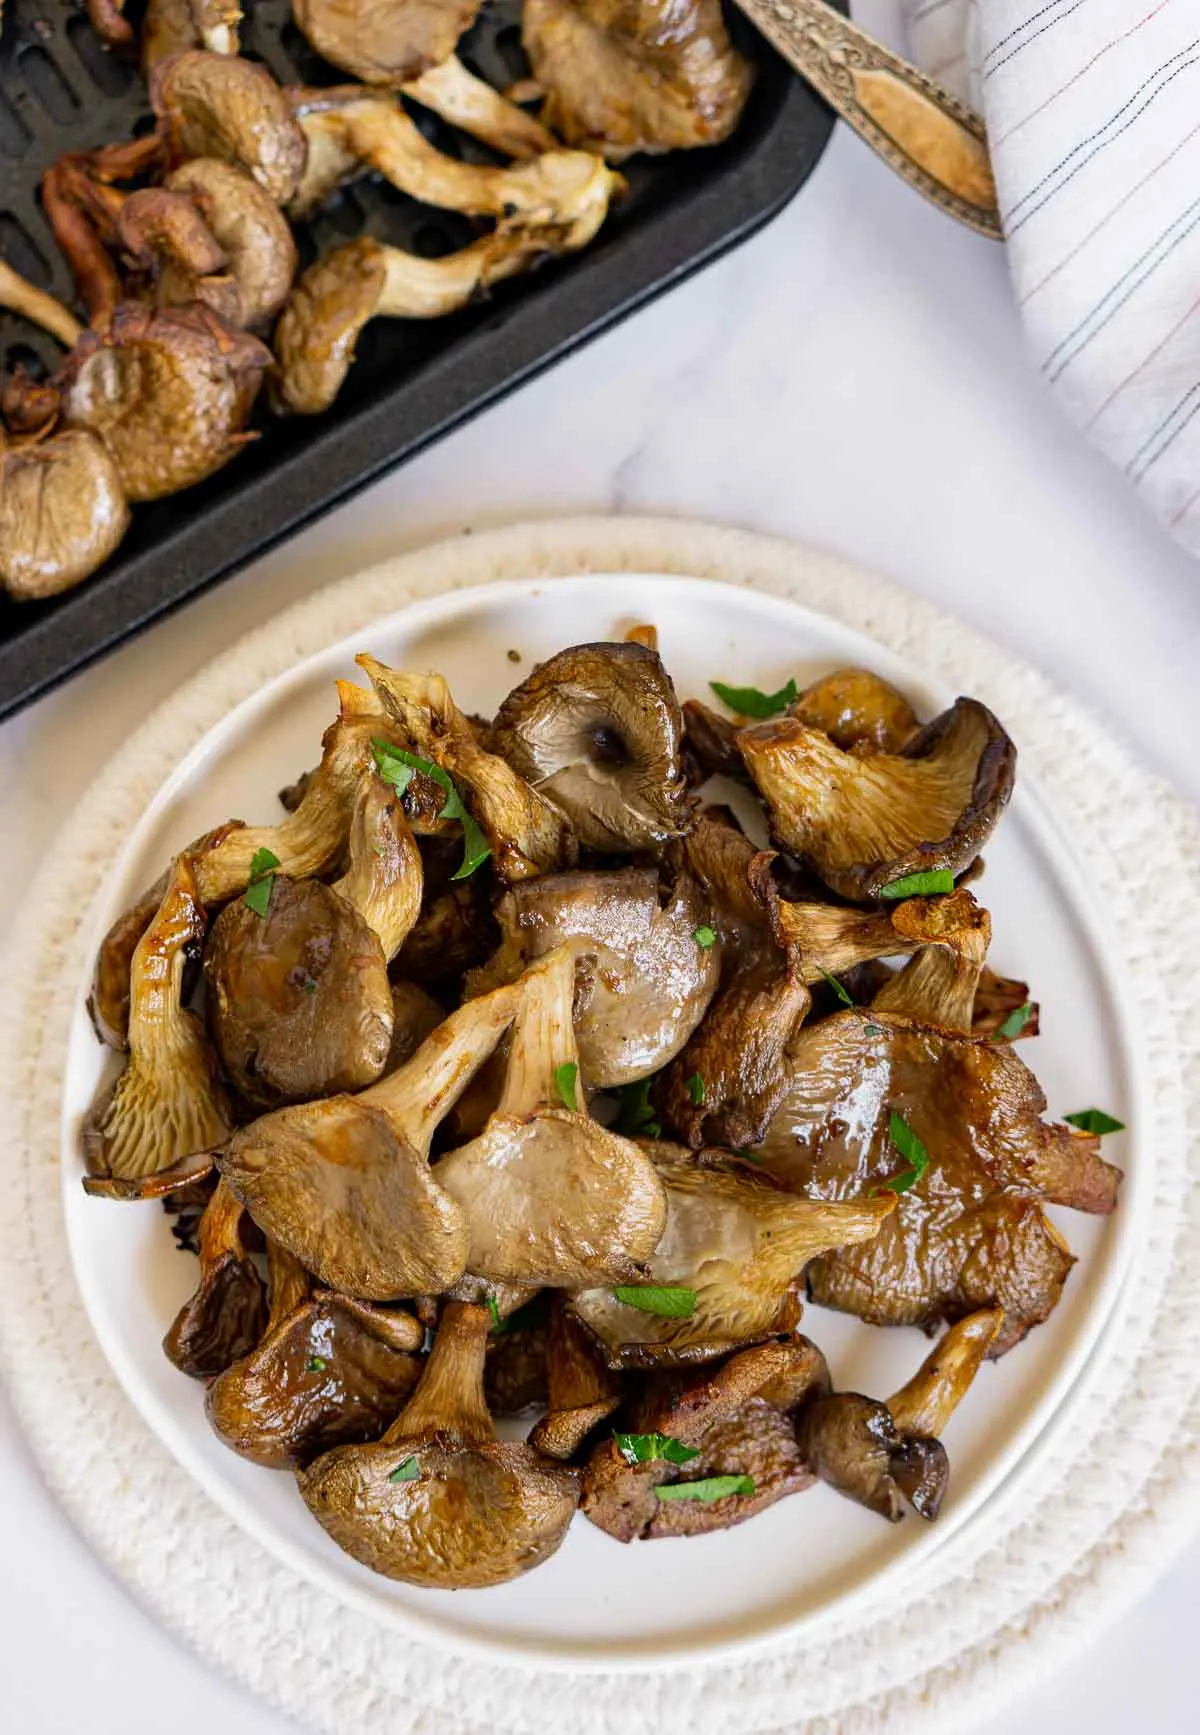 Plate of air fried oyster mushrooms.